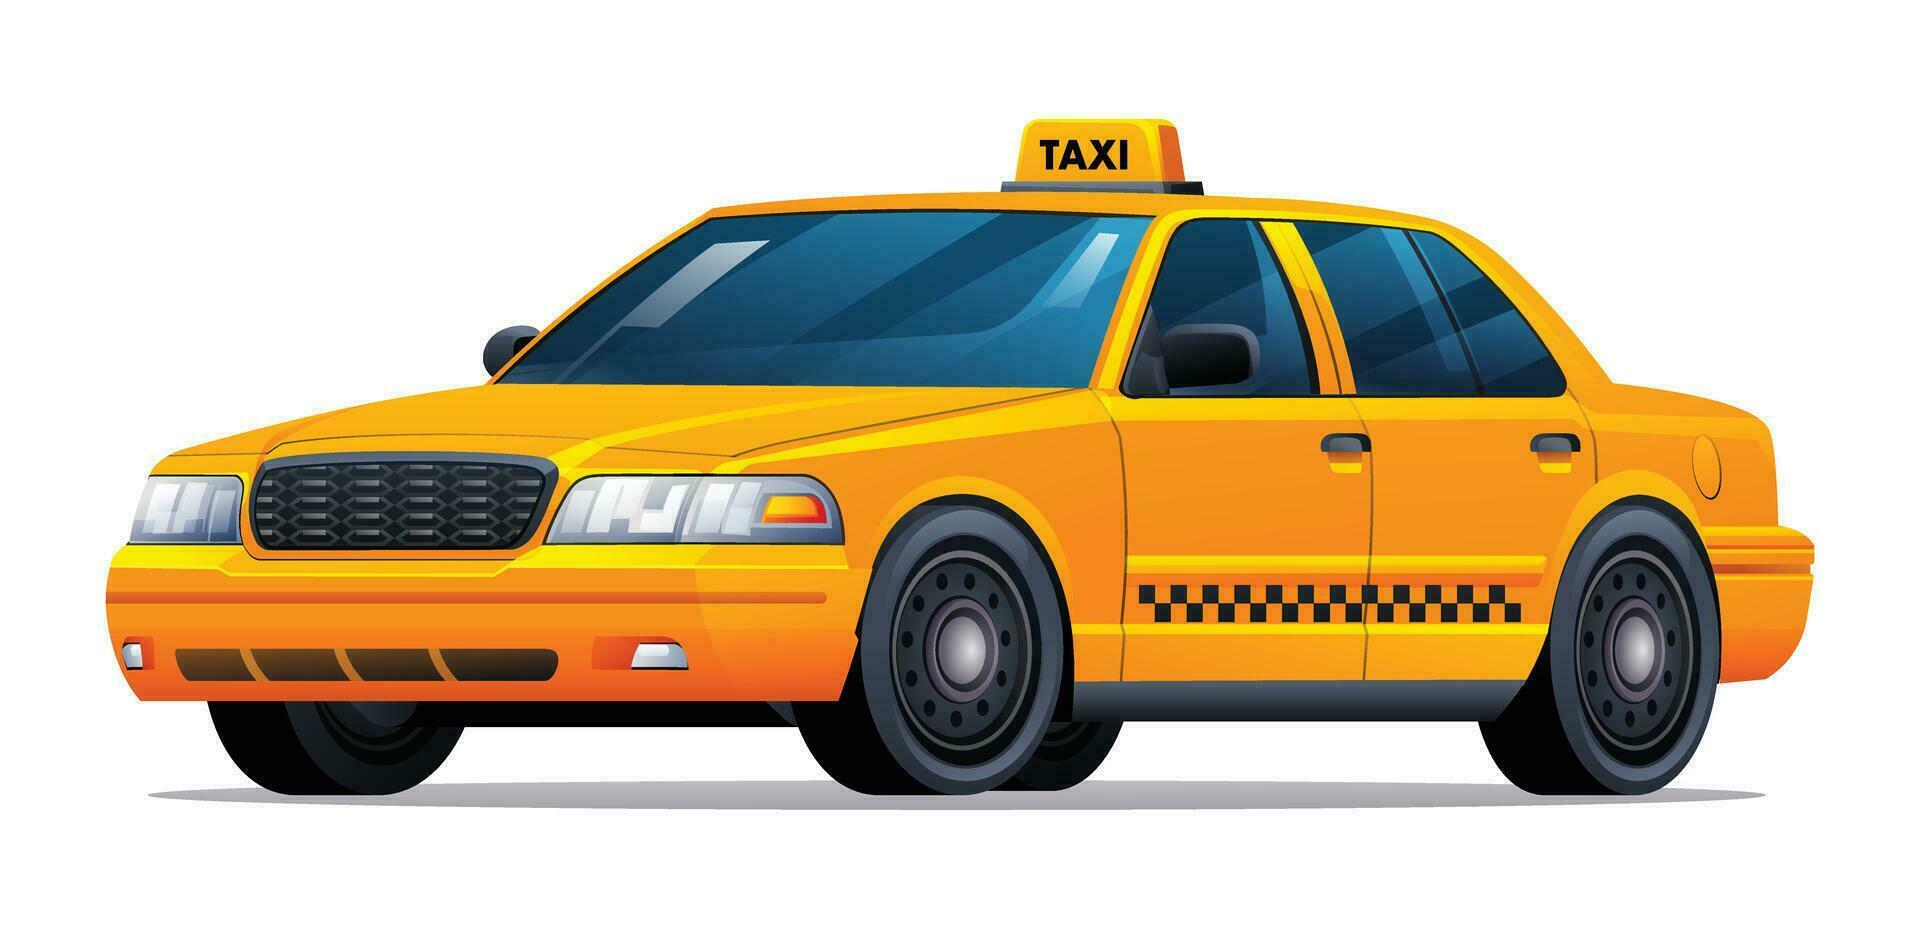 Yellow taxi car vector illustration isolated on white background